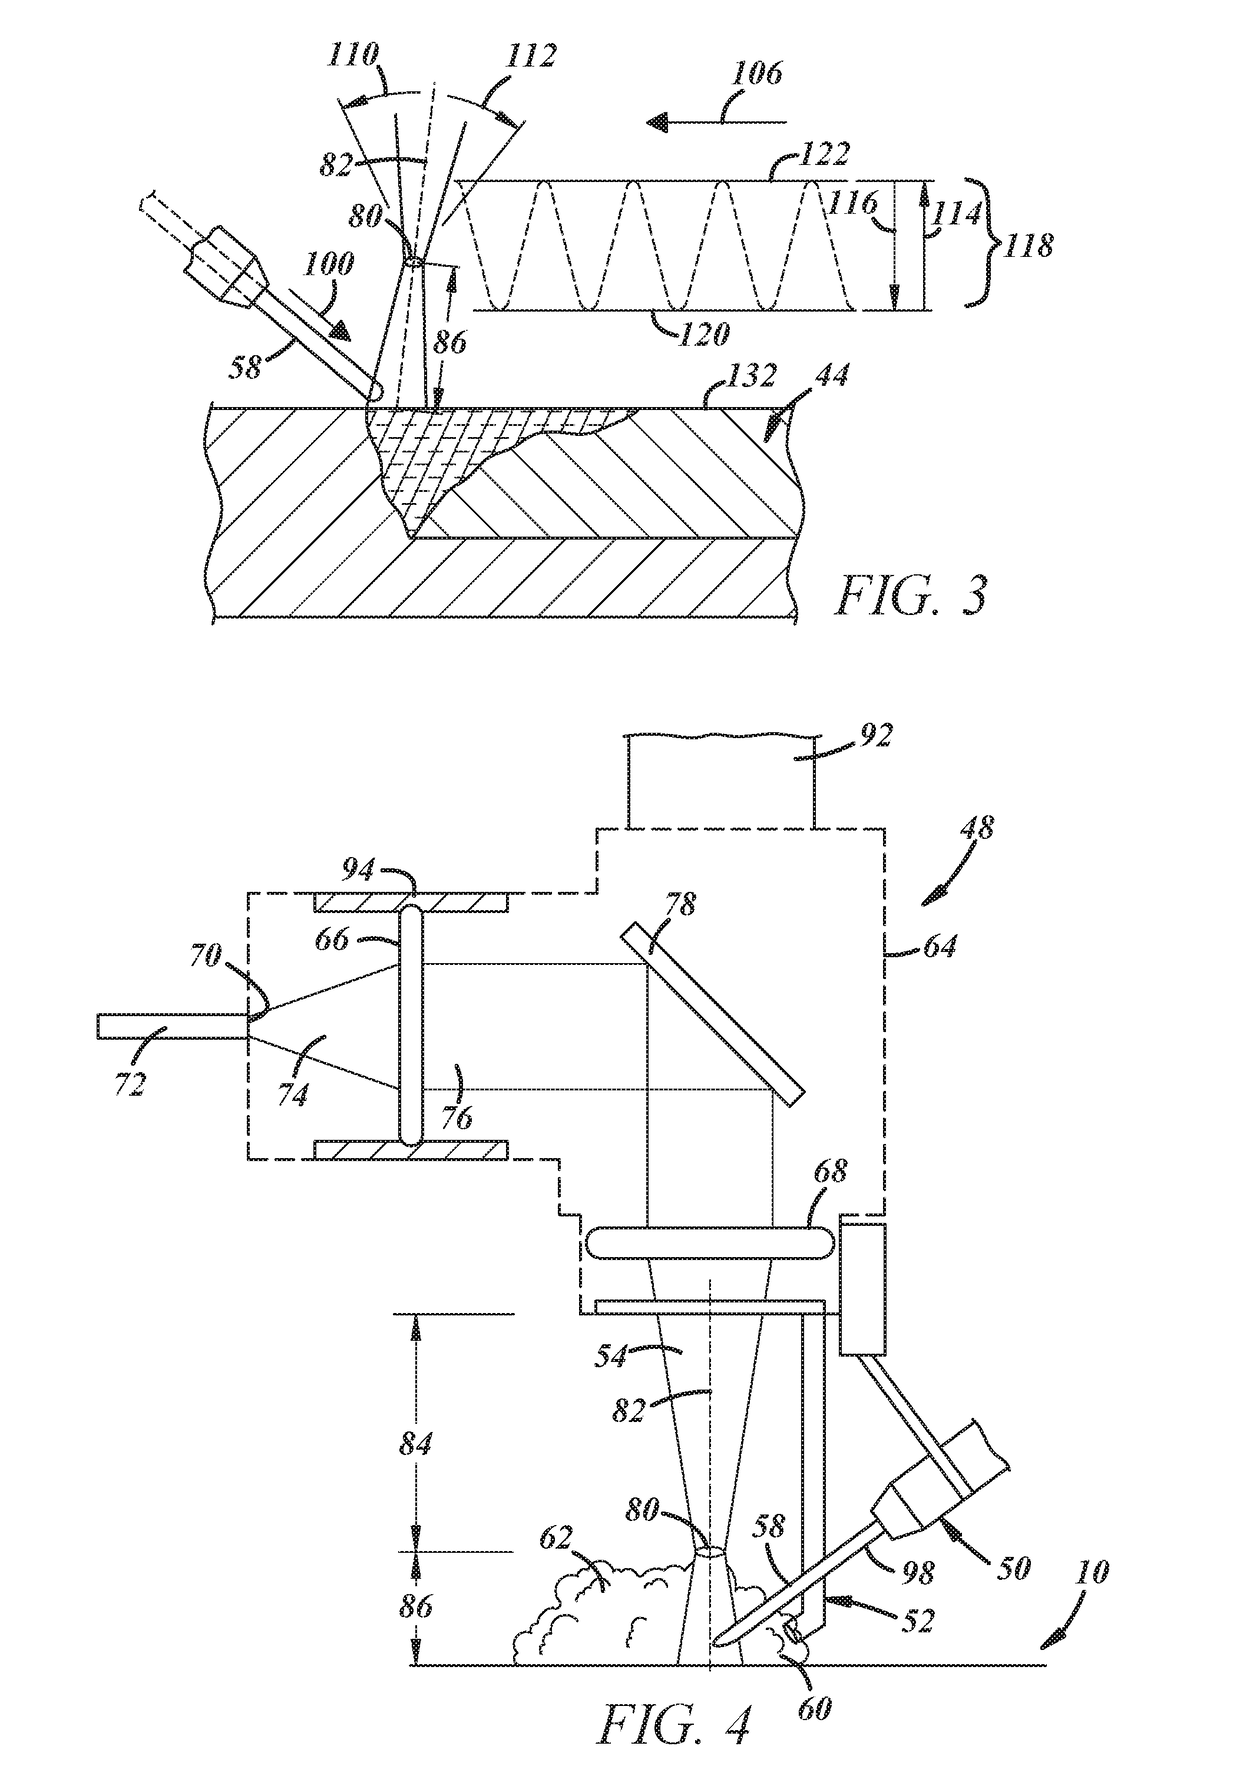 Laser brazing of metal workpieces with relative movement between laser beam and filler wire